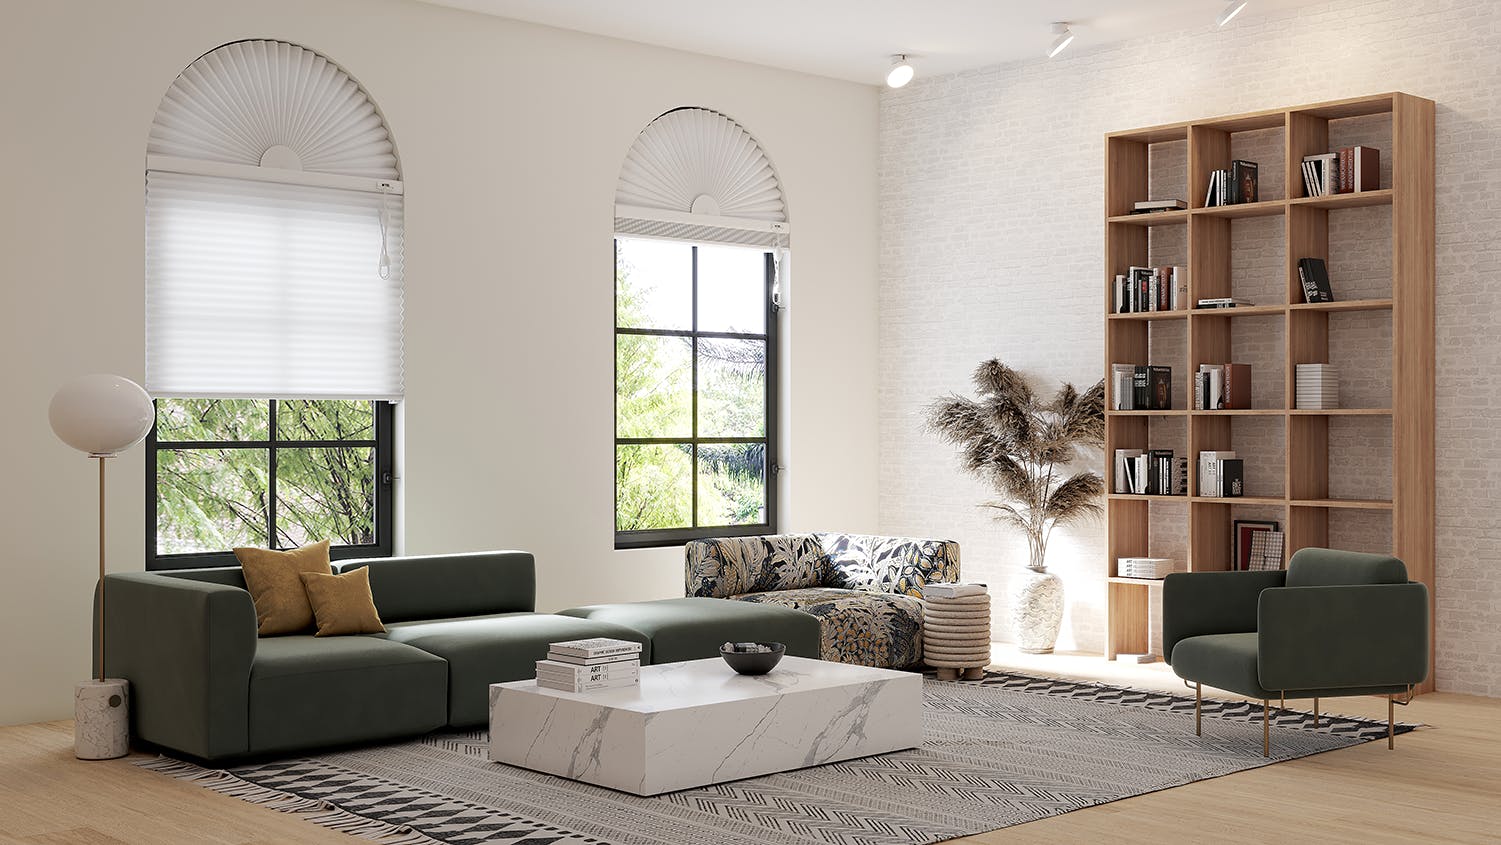 living room with sofa bookshelves white arched window treatments